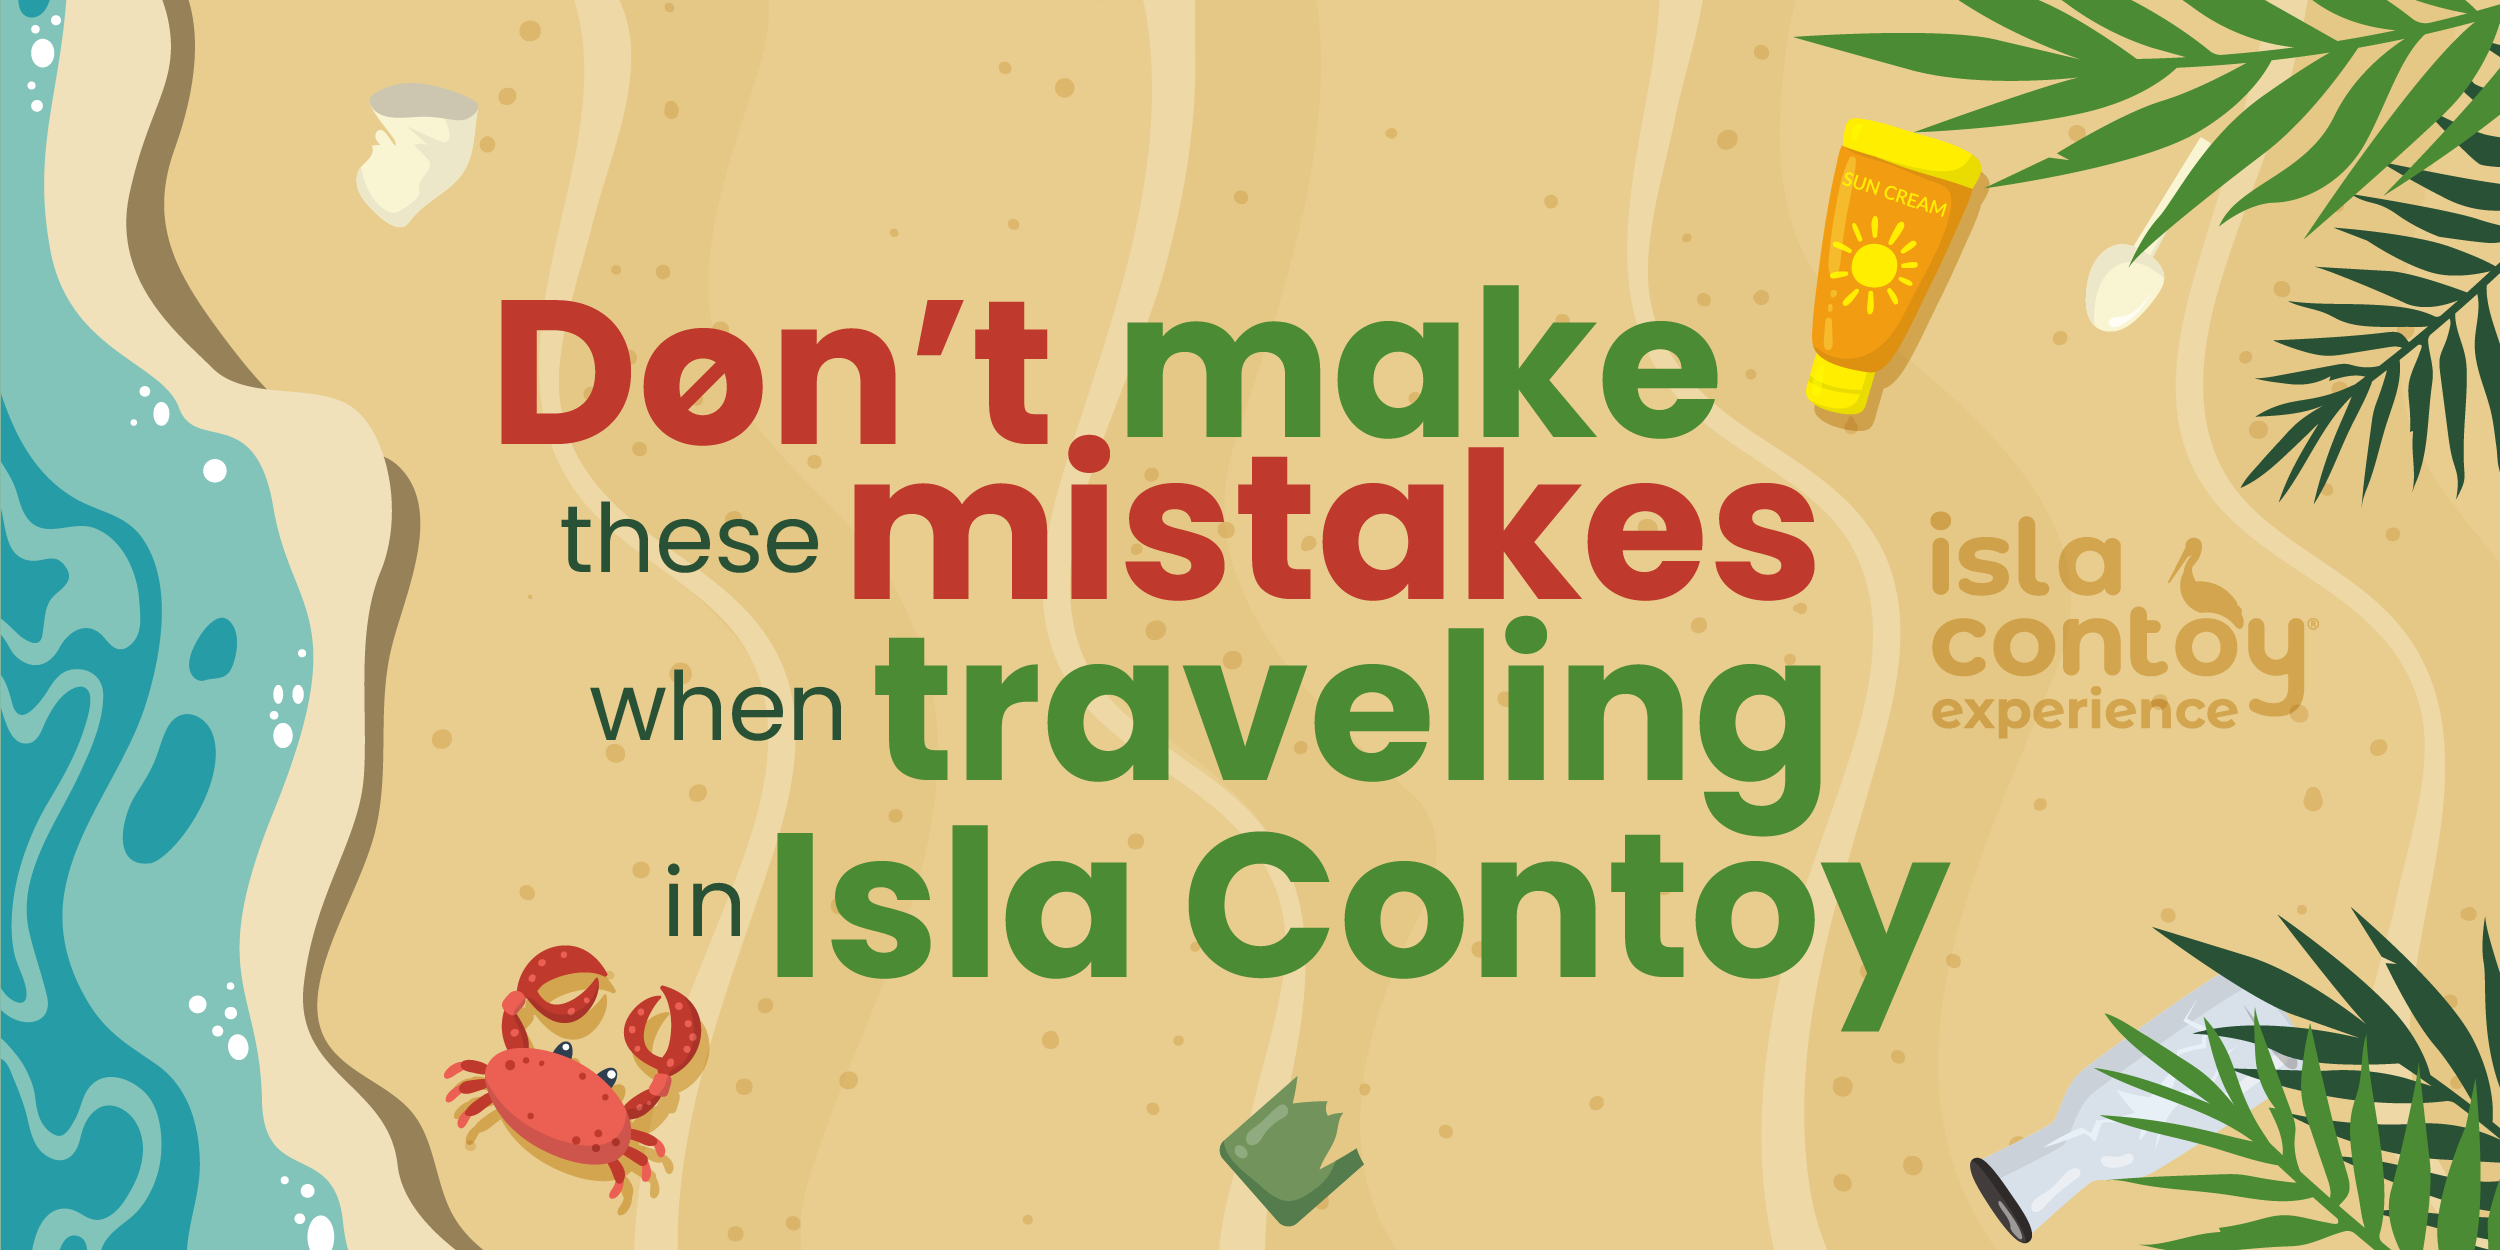 5 mistakes people make when visiting Isla Contoy